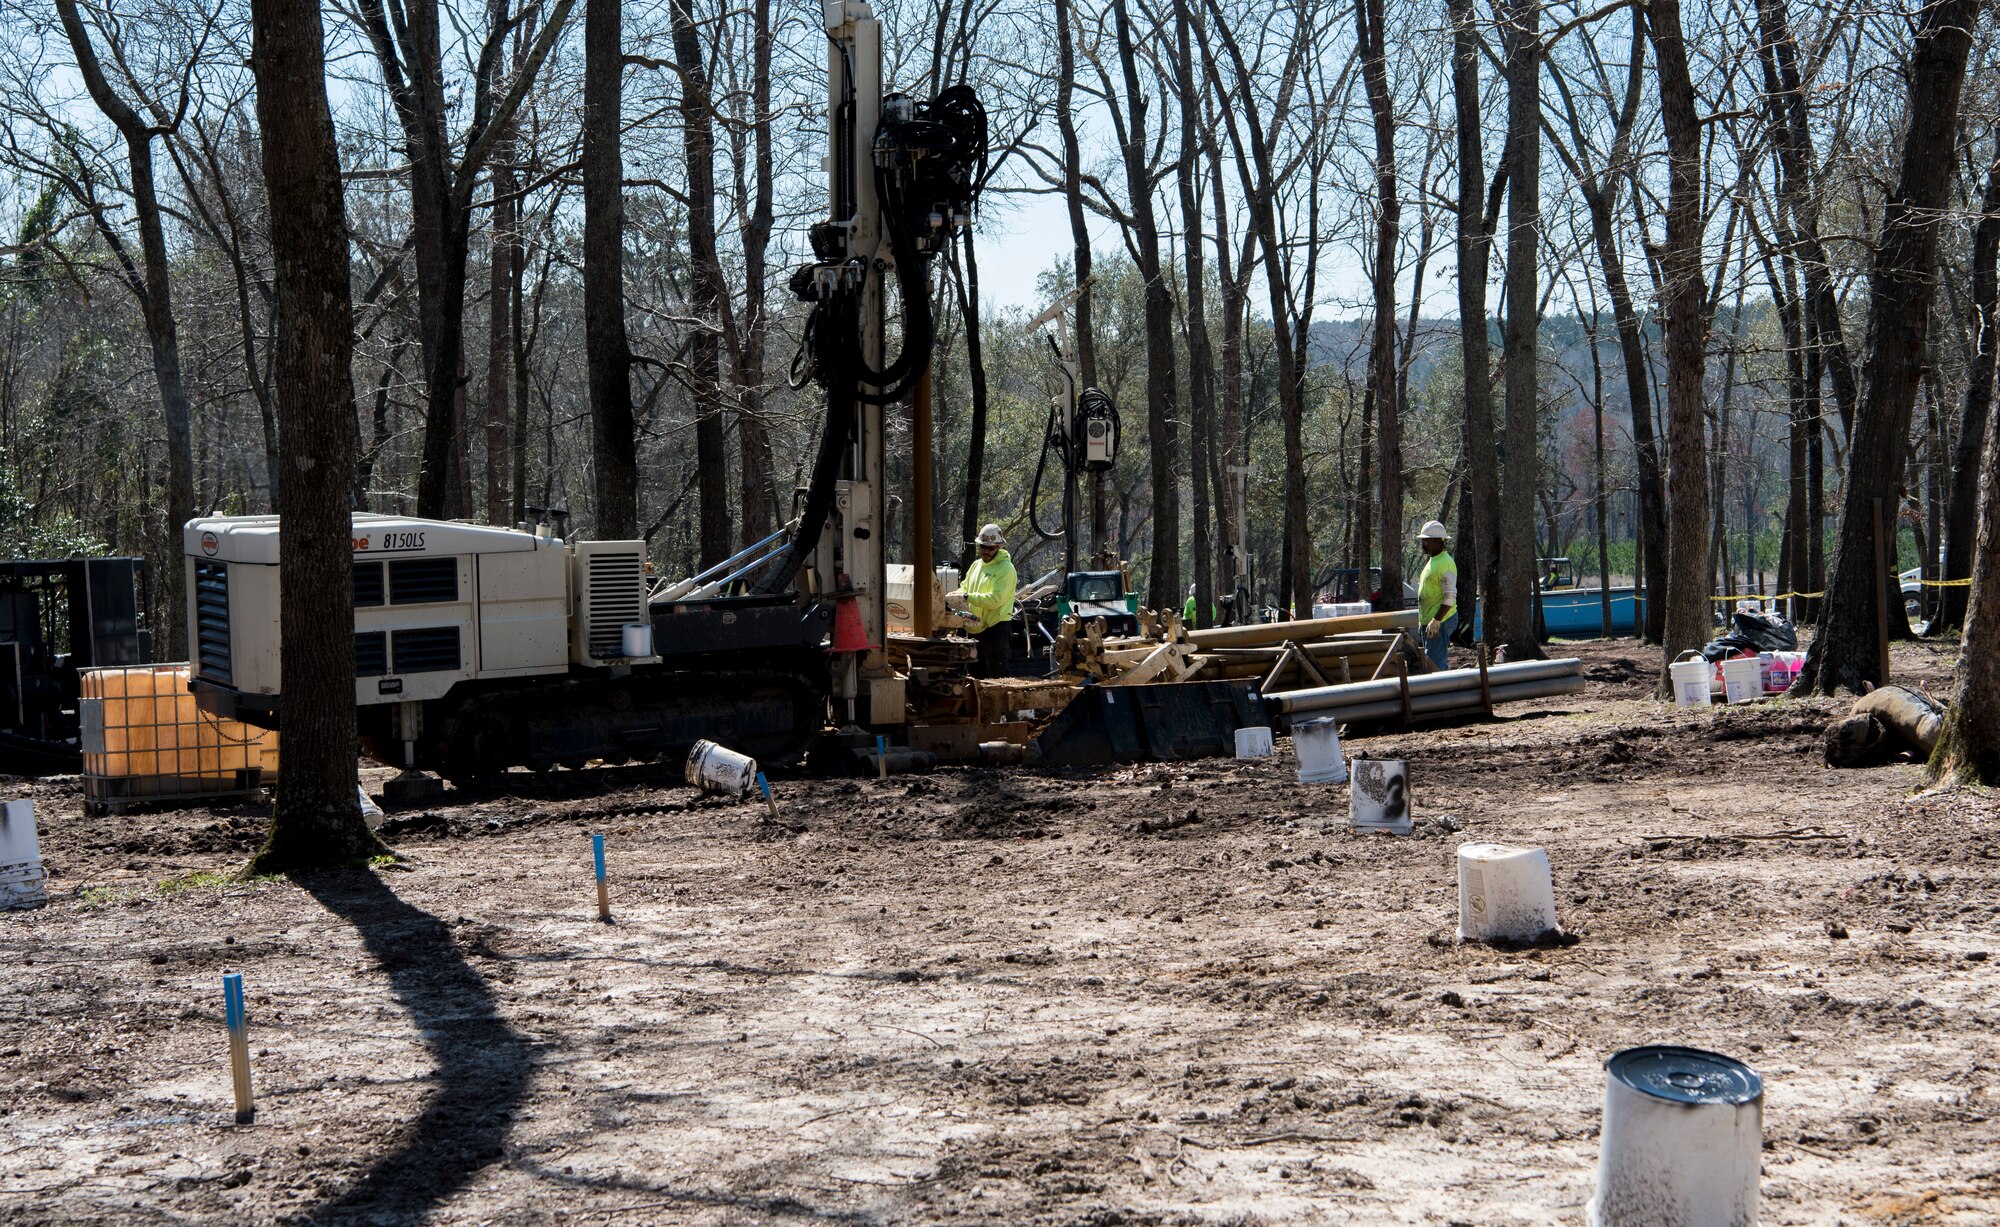 South Atlantic Environmental Drilling and Construction Company workers use a Geoprobe Rotary Sonic drill rig to drill a small diameter pipe into the ground at Sans Souci Farm in Sumter, S.C., March 7, 2019.